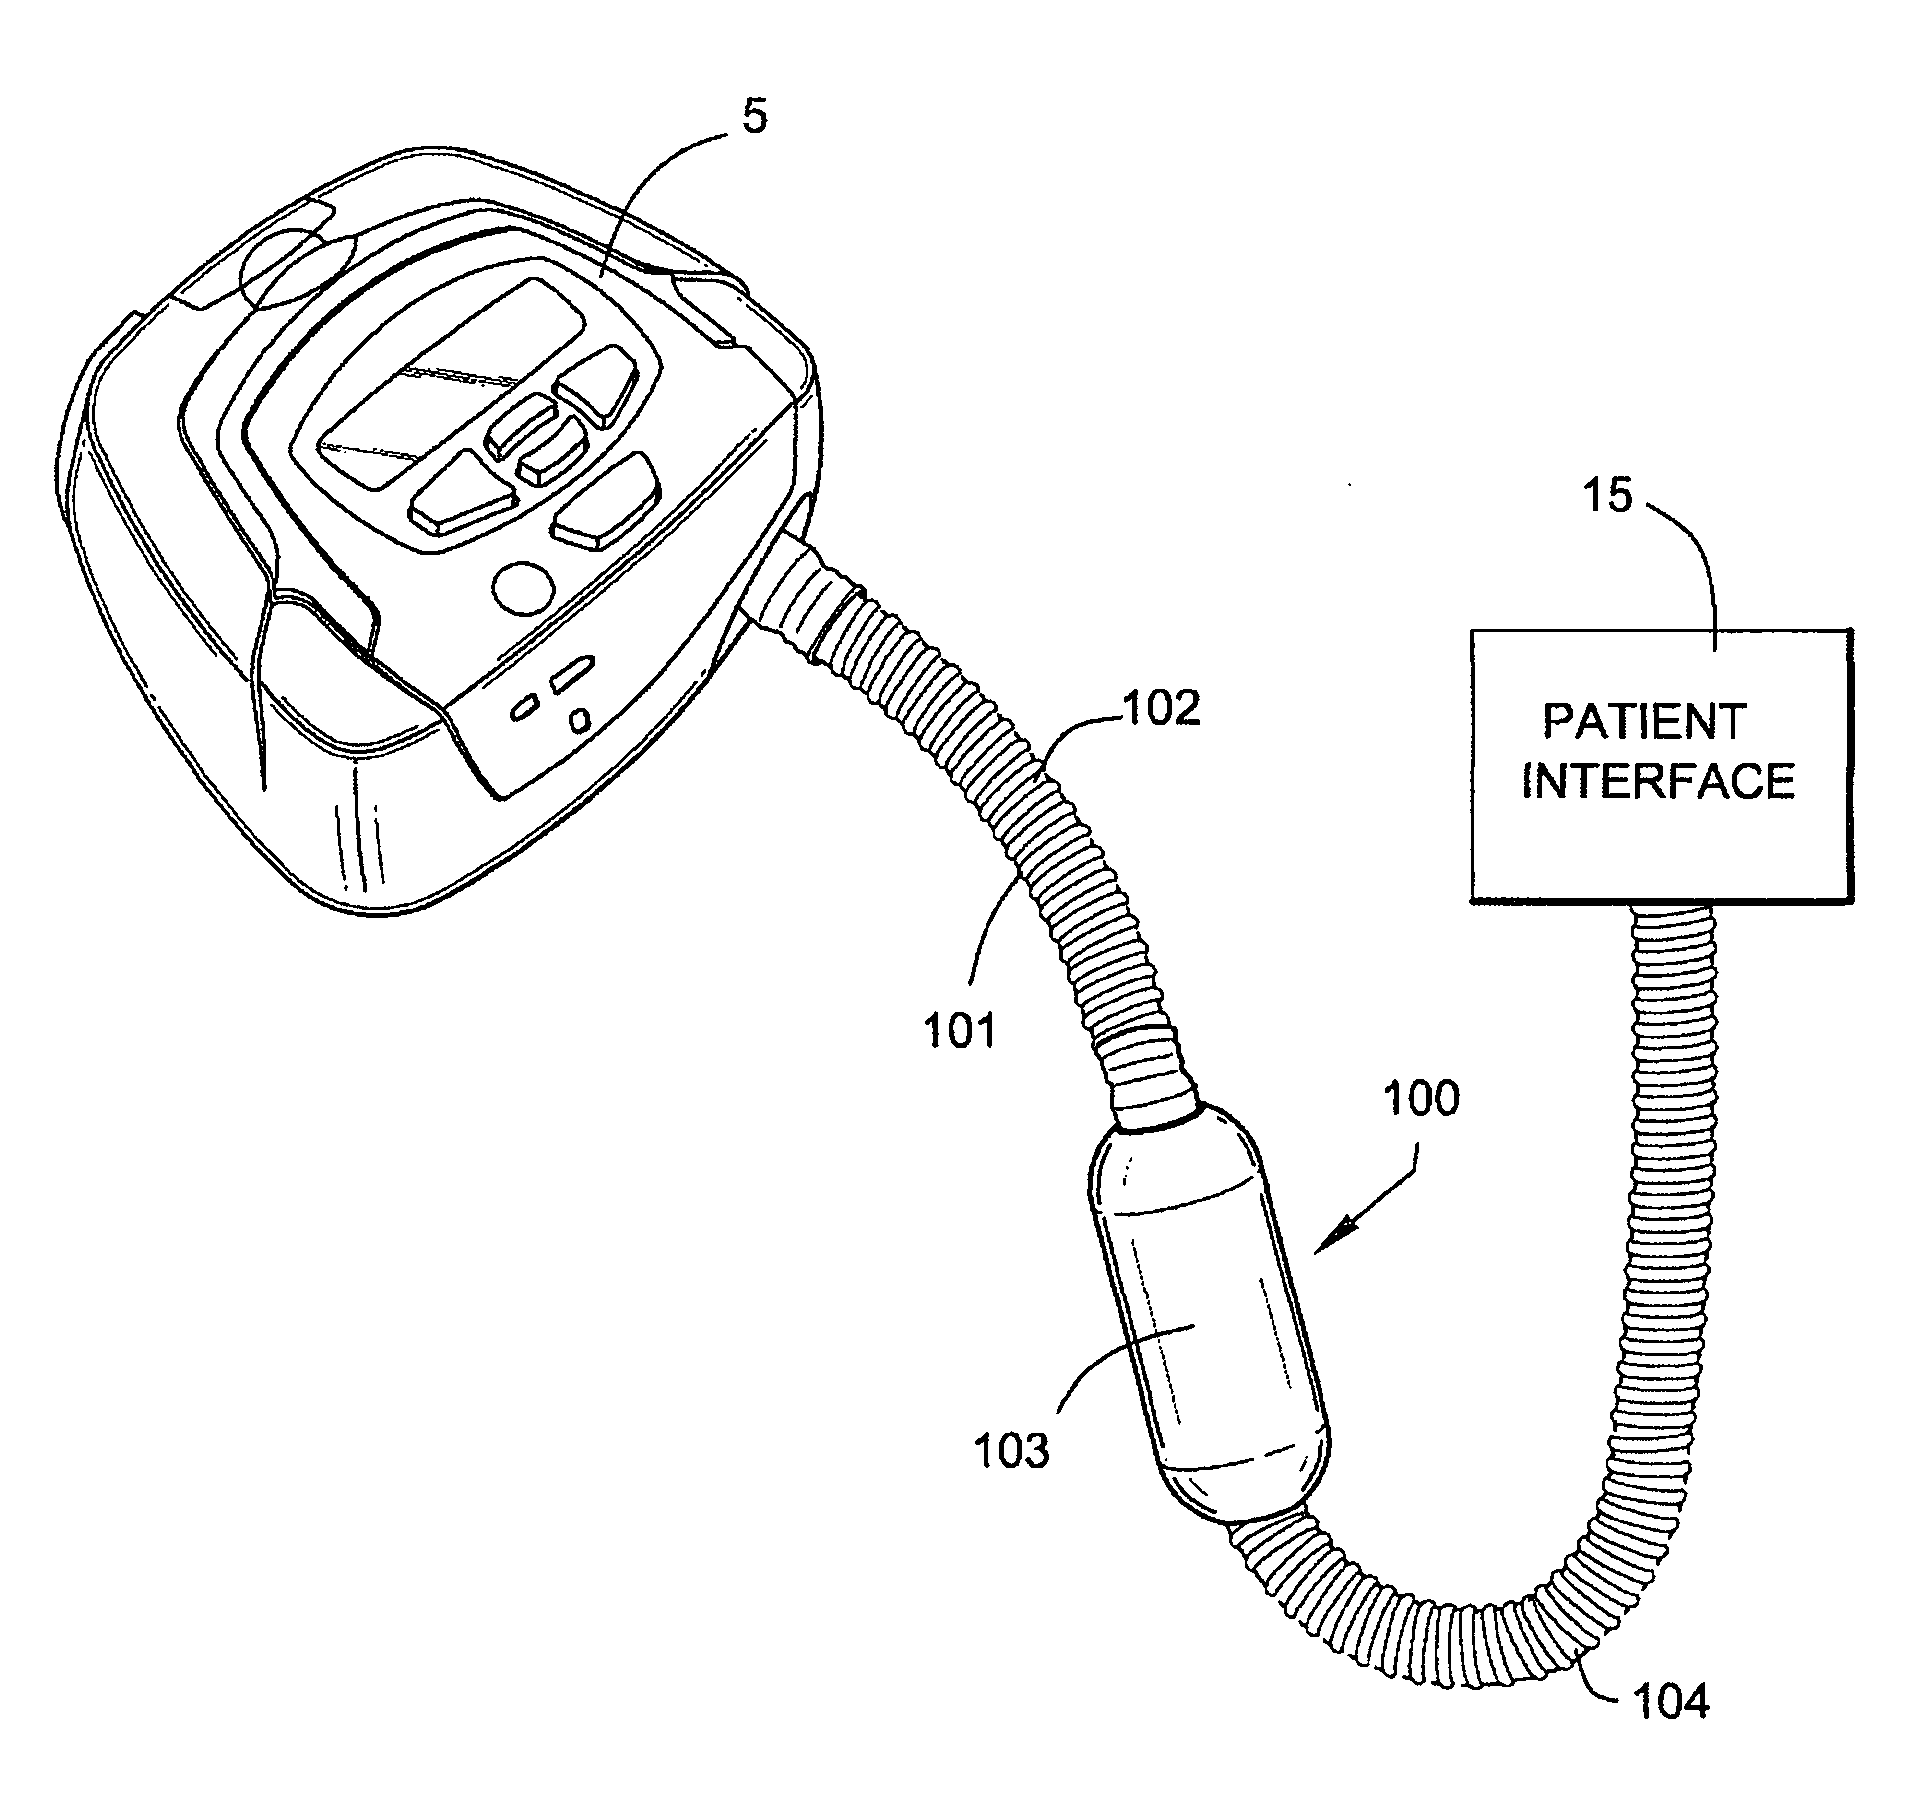 Sound dampening in positive airway pressure devices